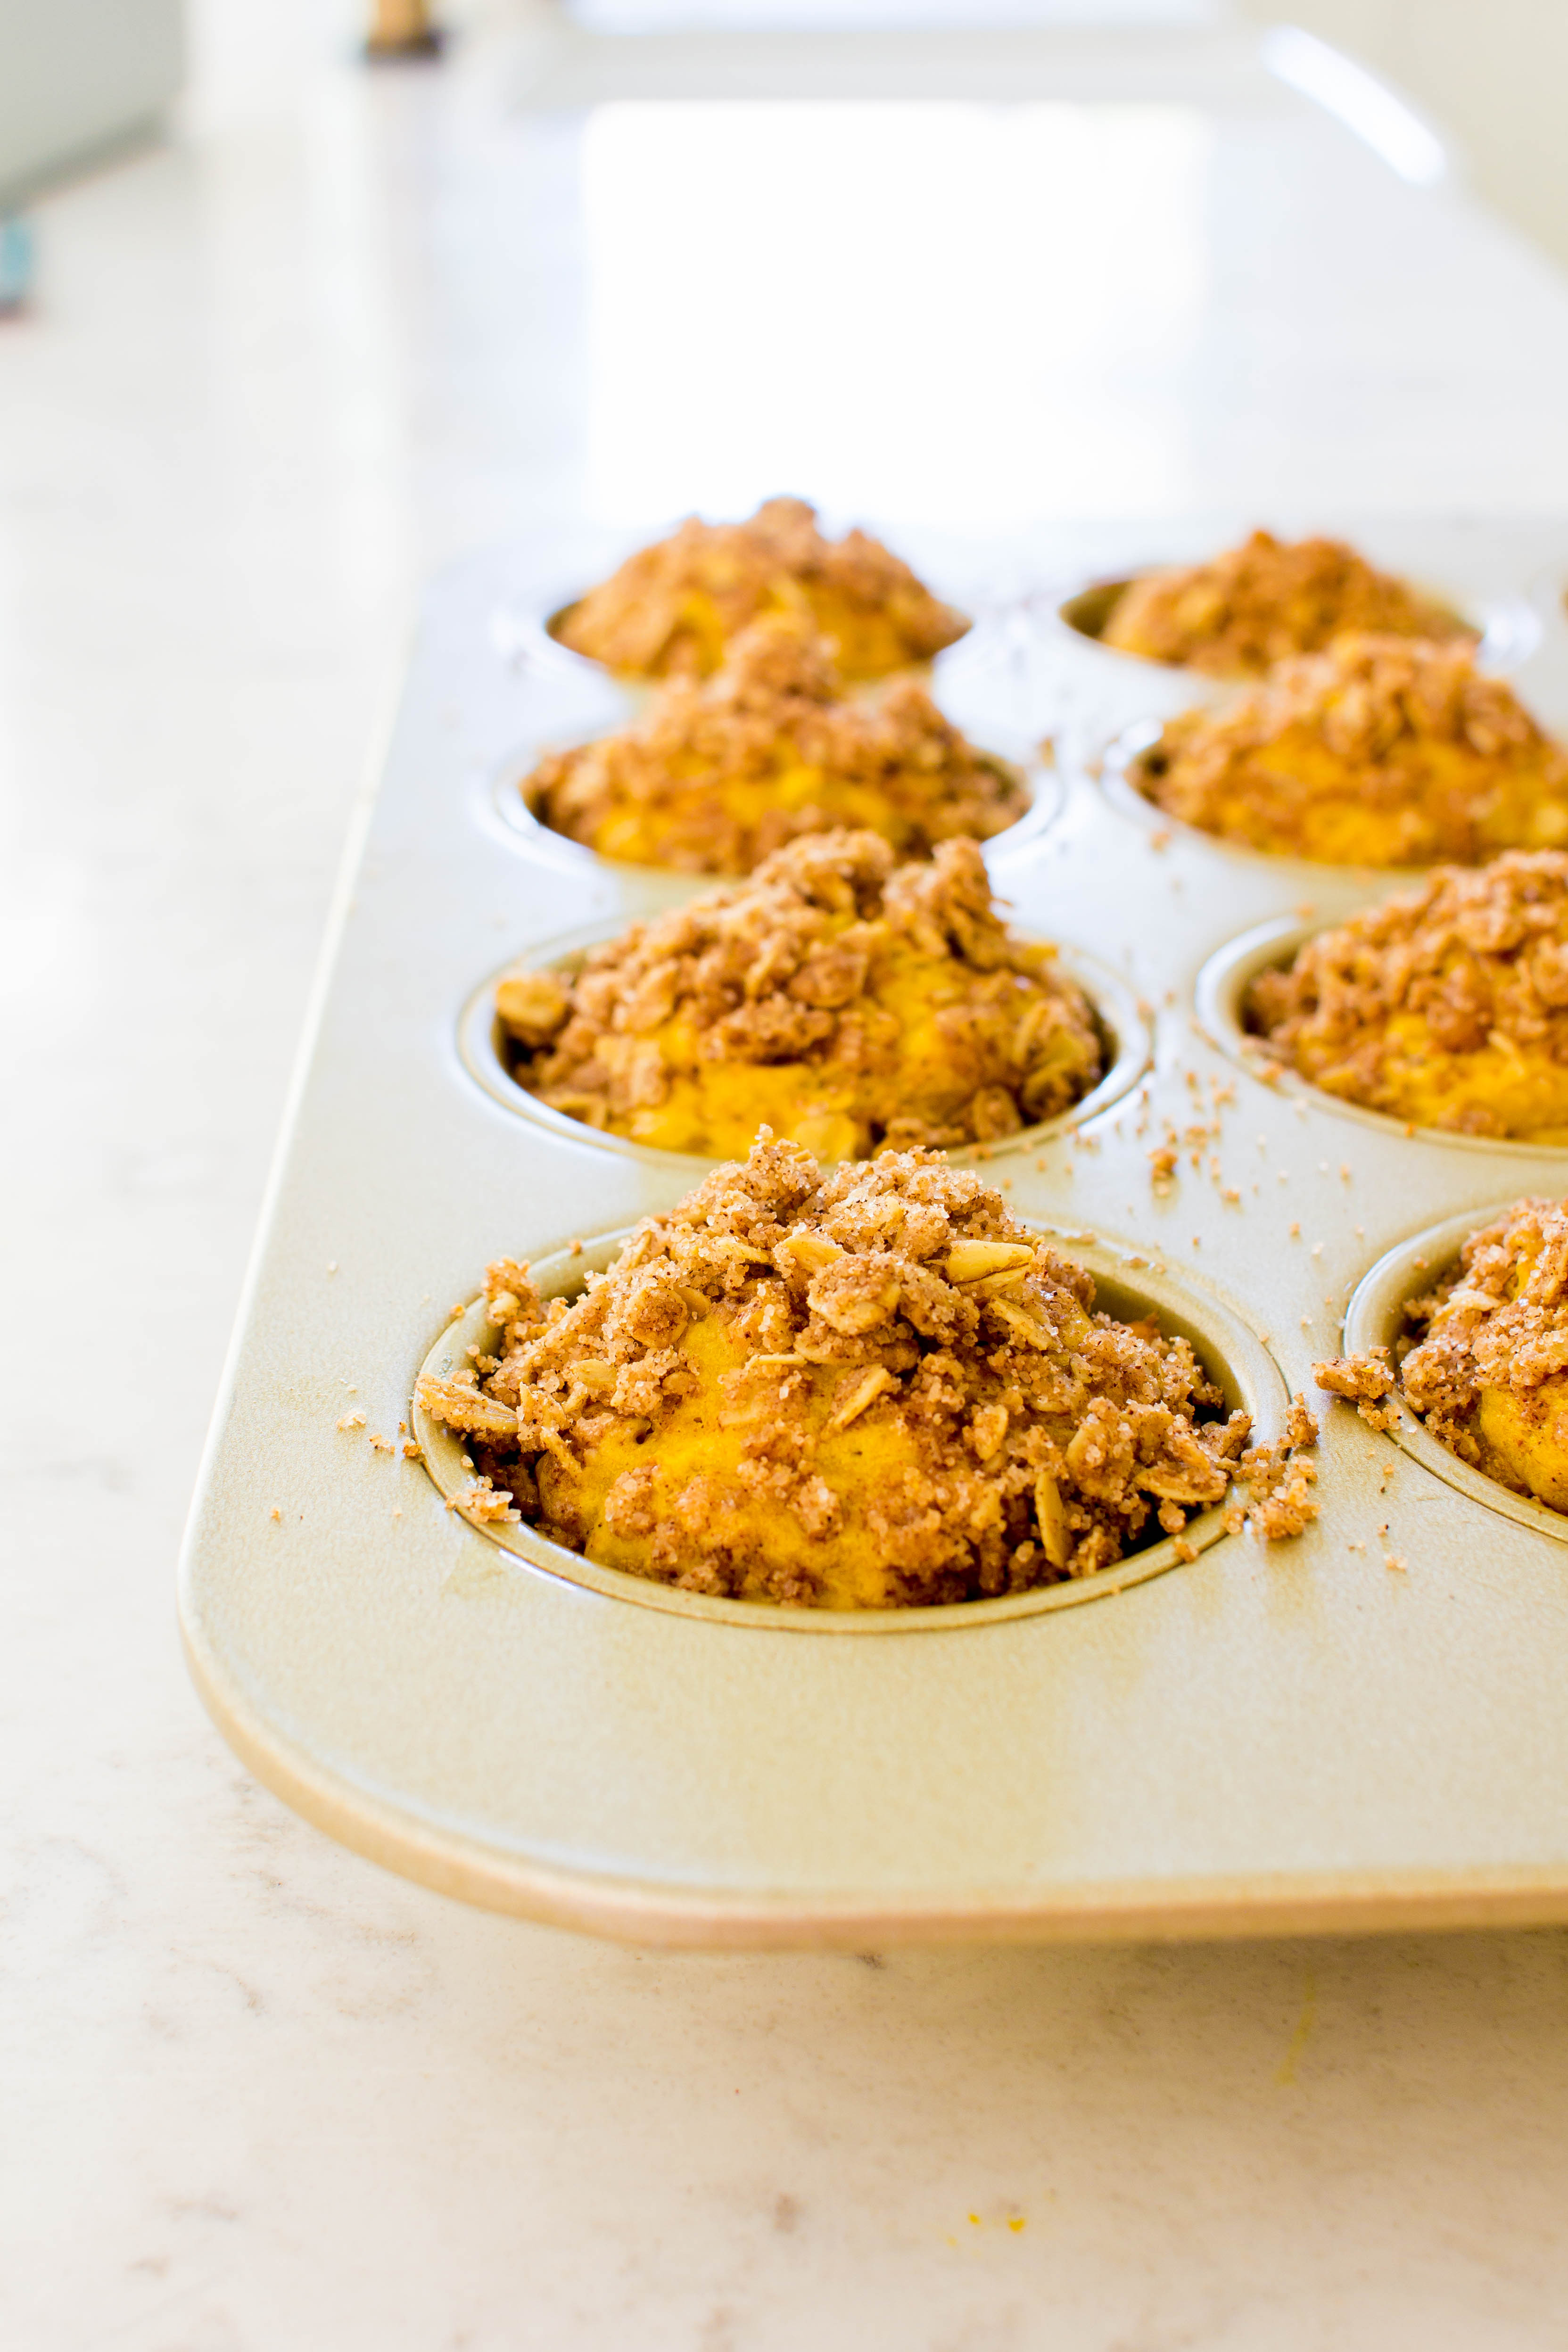 time for some fall baking!!! Pumpkin oatmeal muffins with snickerdoodle streusel | immaEATthat.com